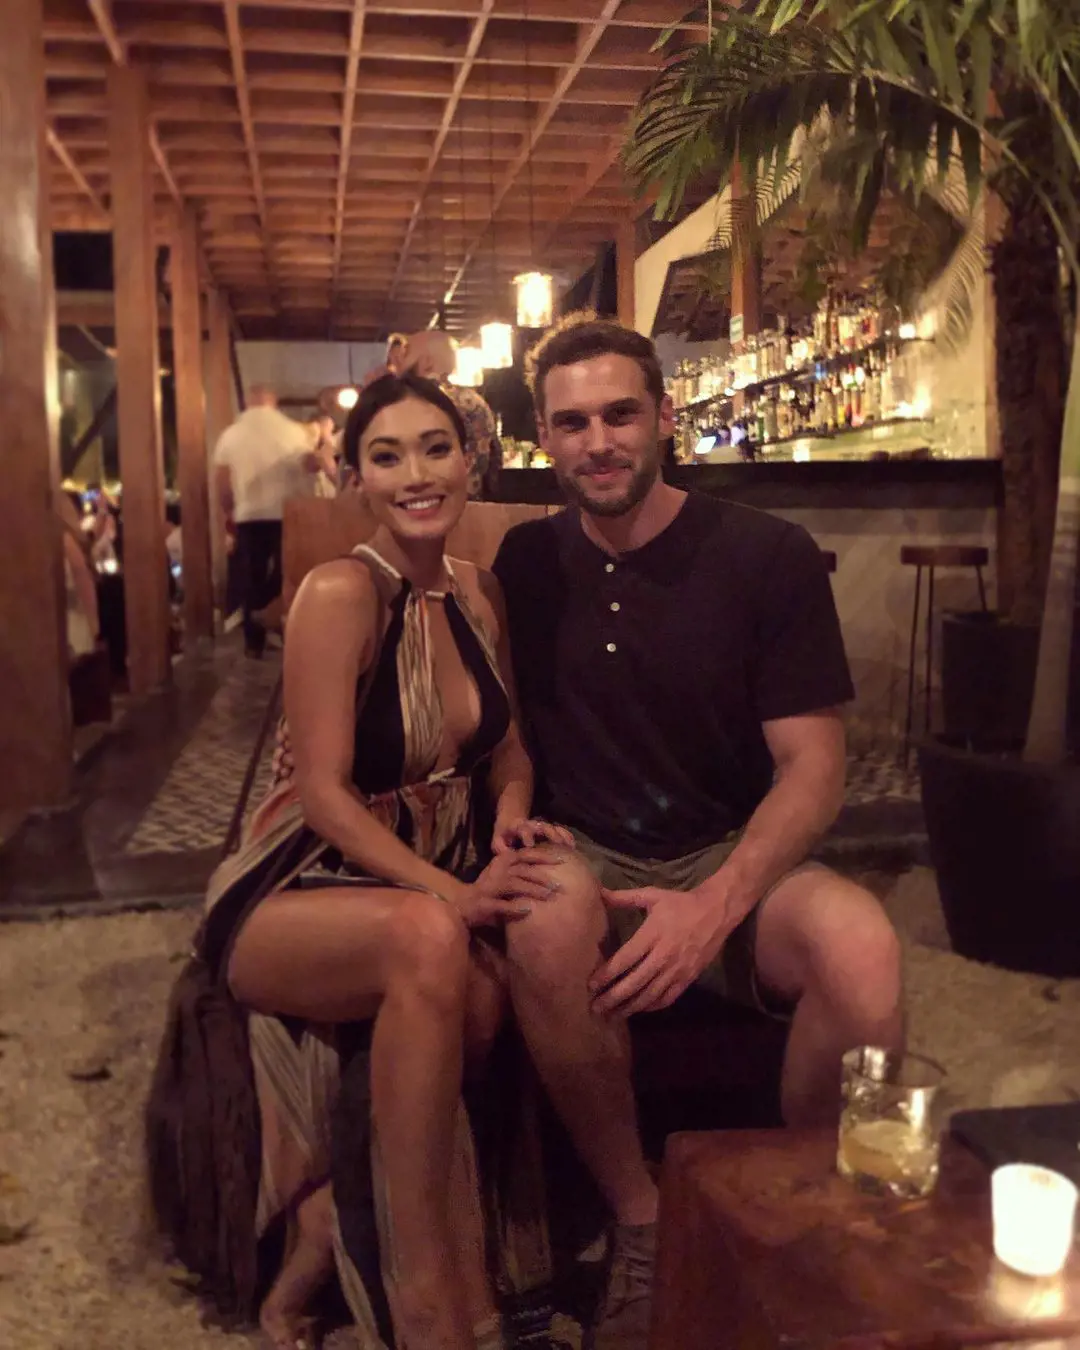 Catherine with her ex-partner Brad on their date at Tulum 